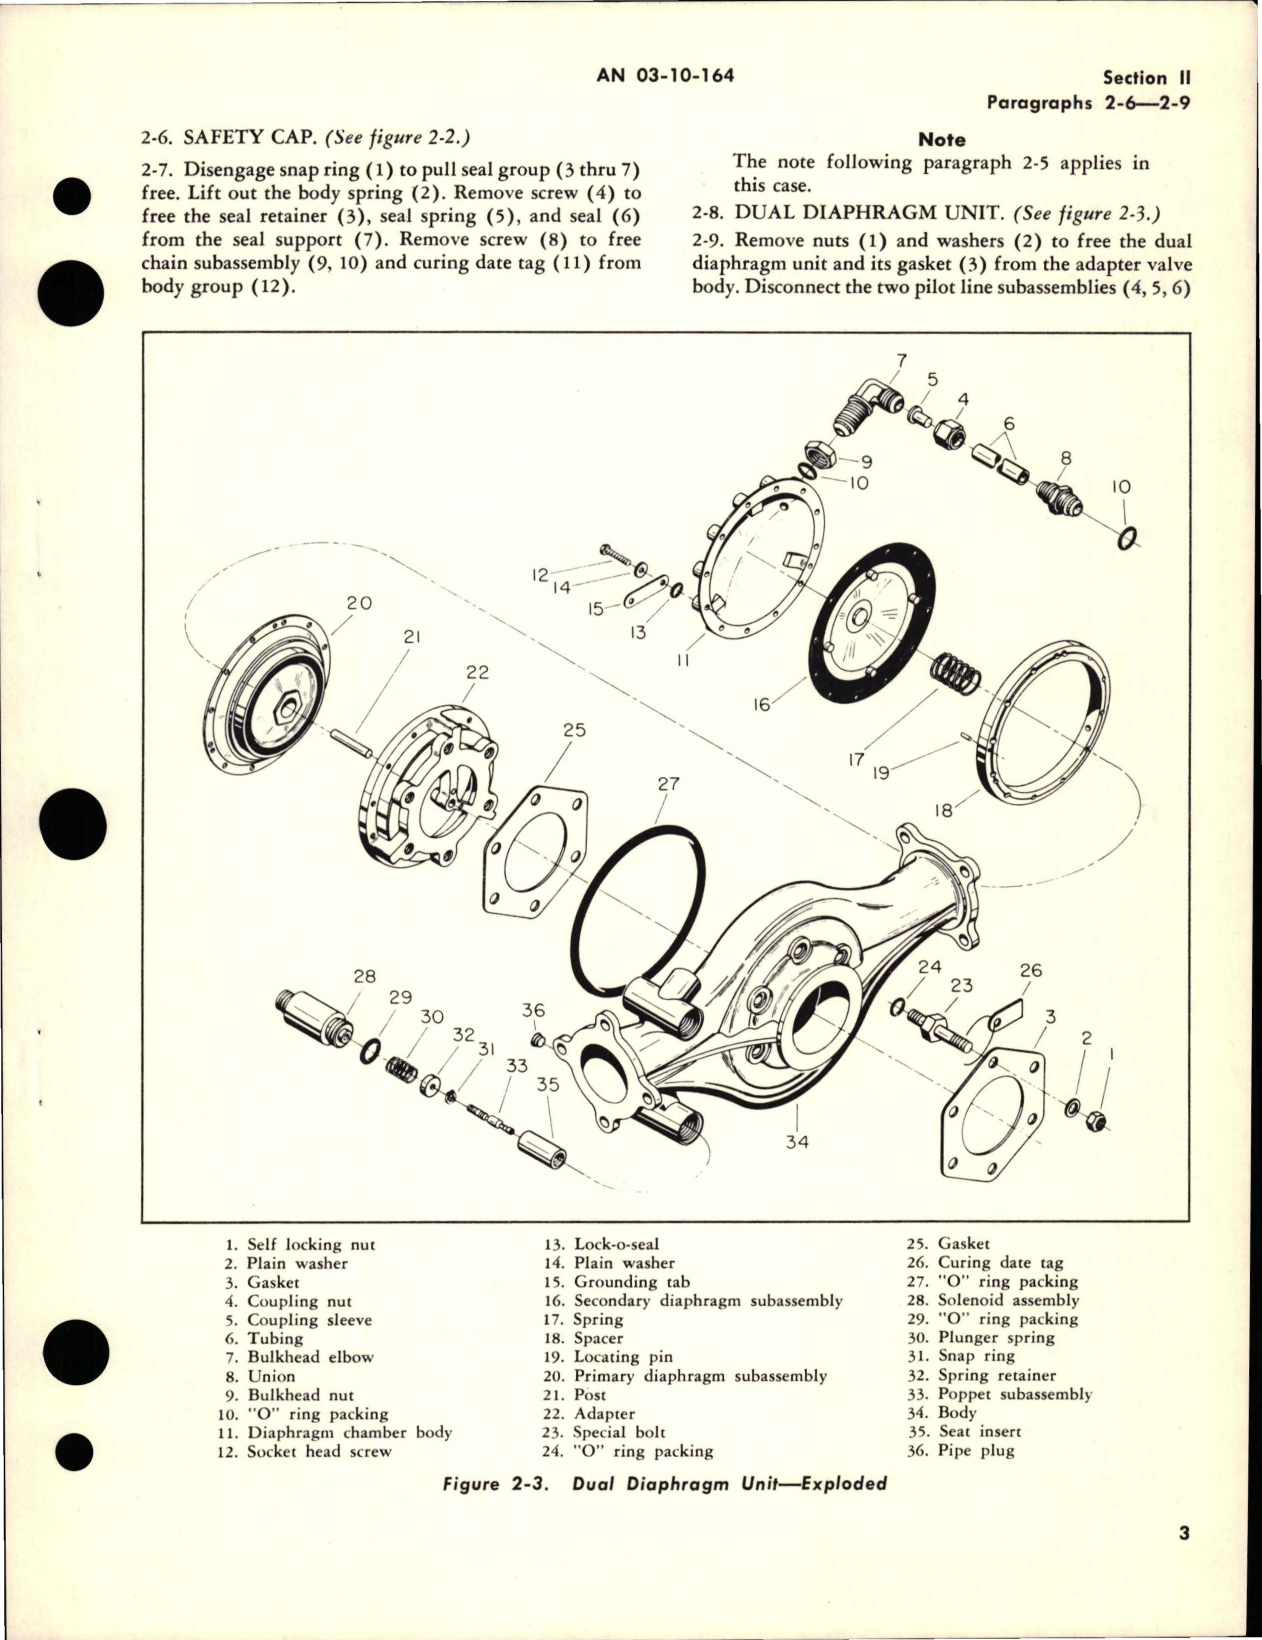 Sample page 5 from AirCorps Library document: Overhaul Instructions for Adapter Valve, Safety Cap and Dual Diaphragm Unit - Part 1322-527058 and 8-850-3 